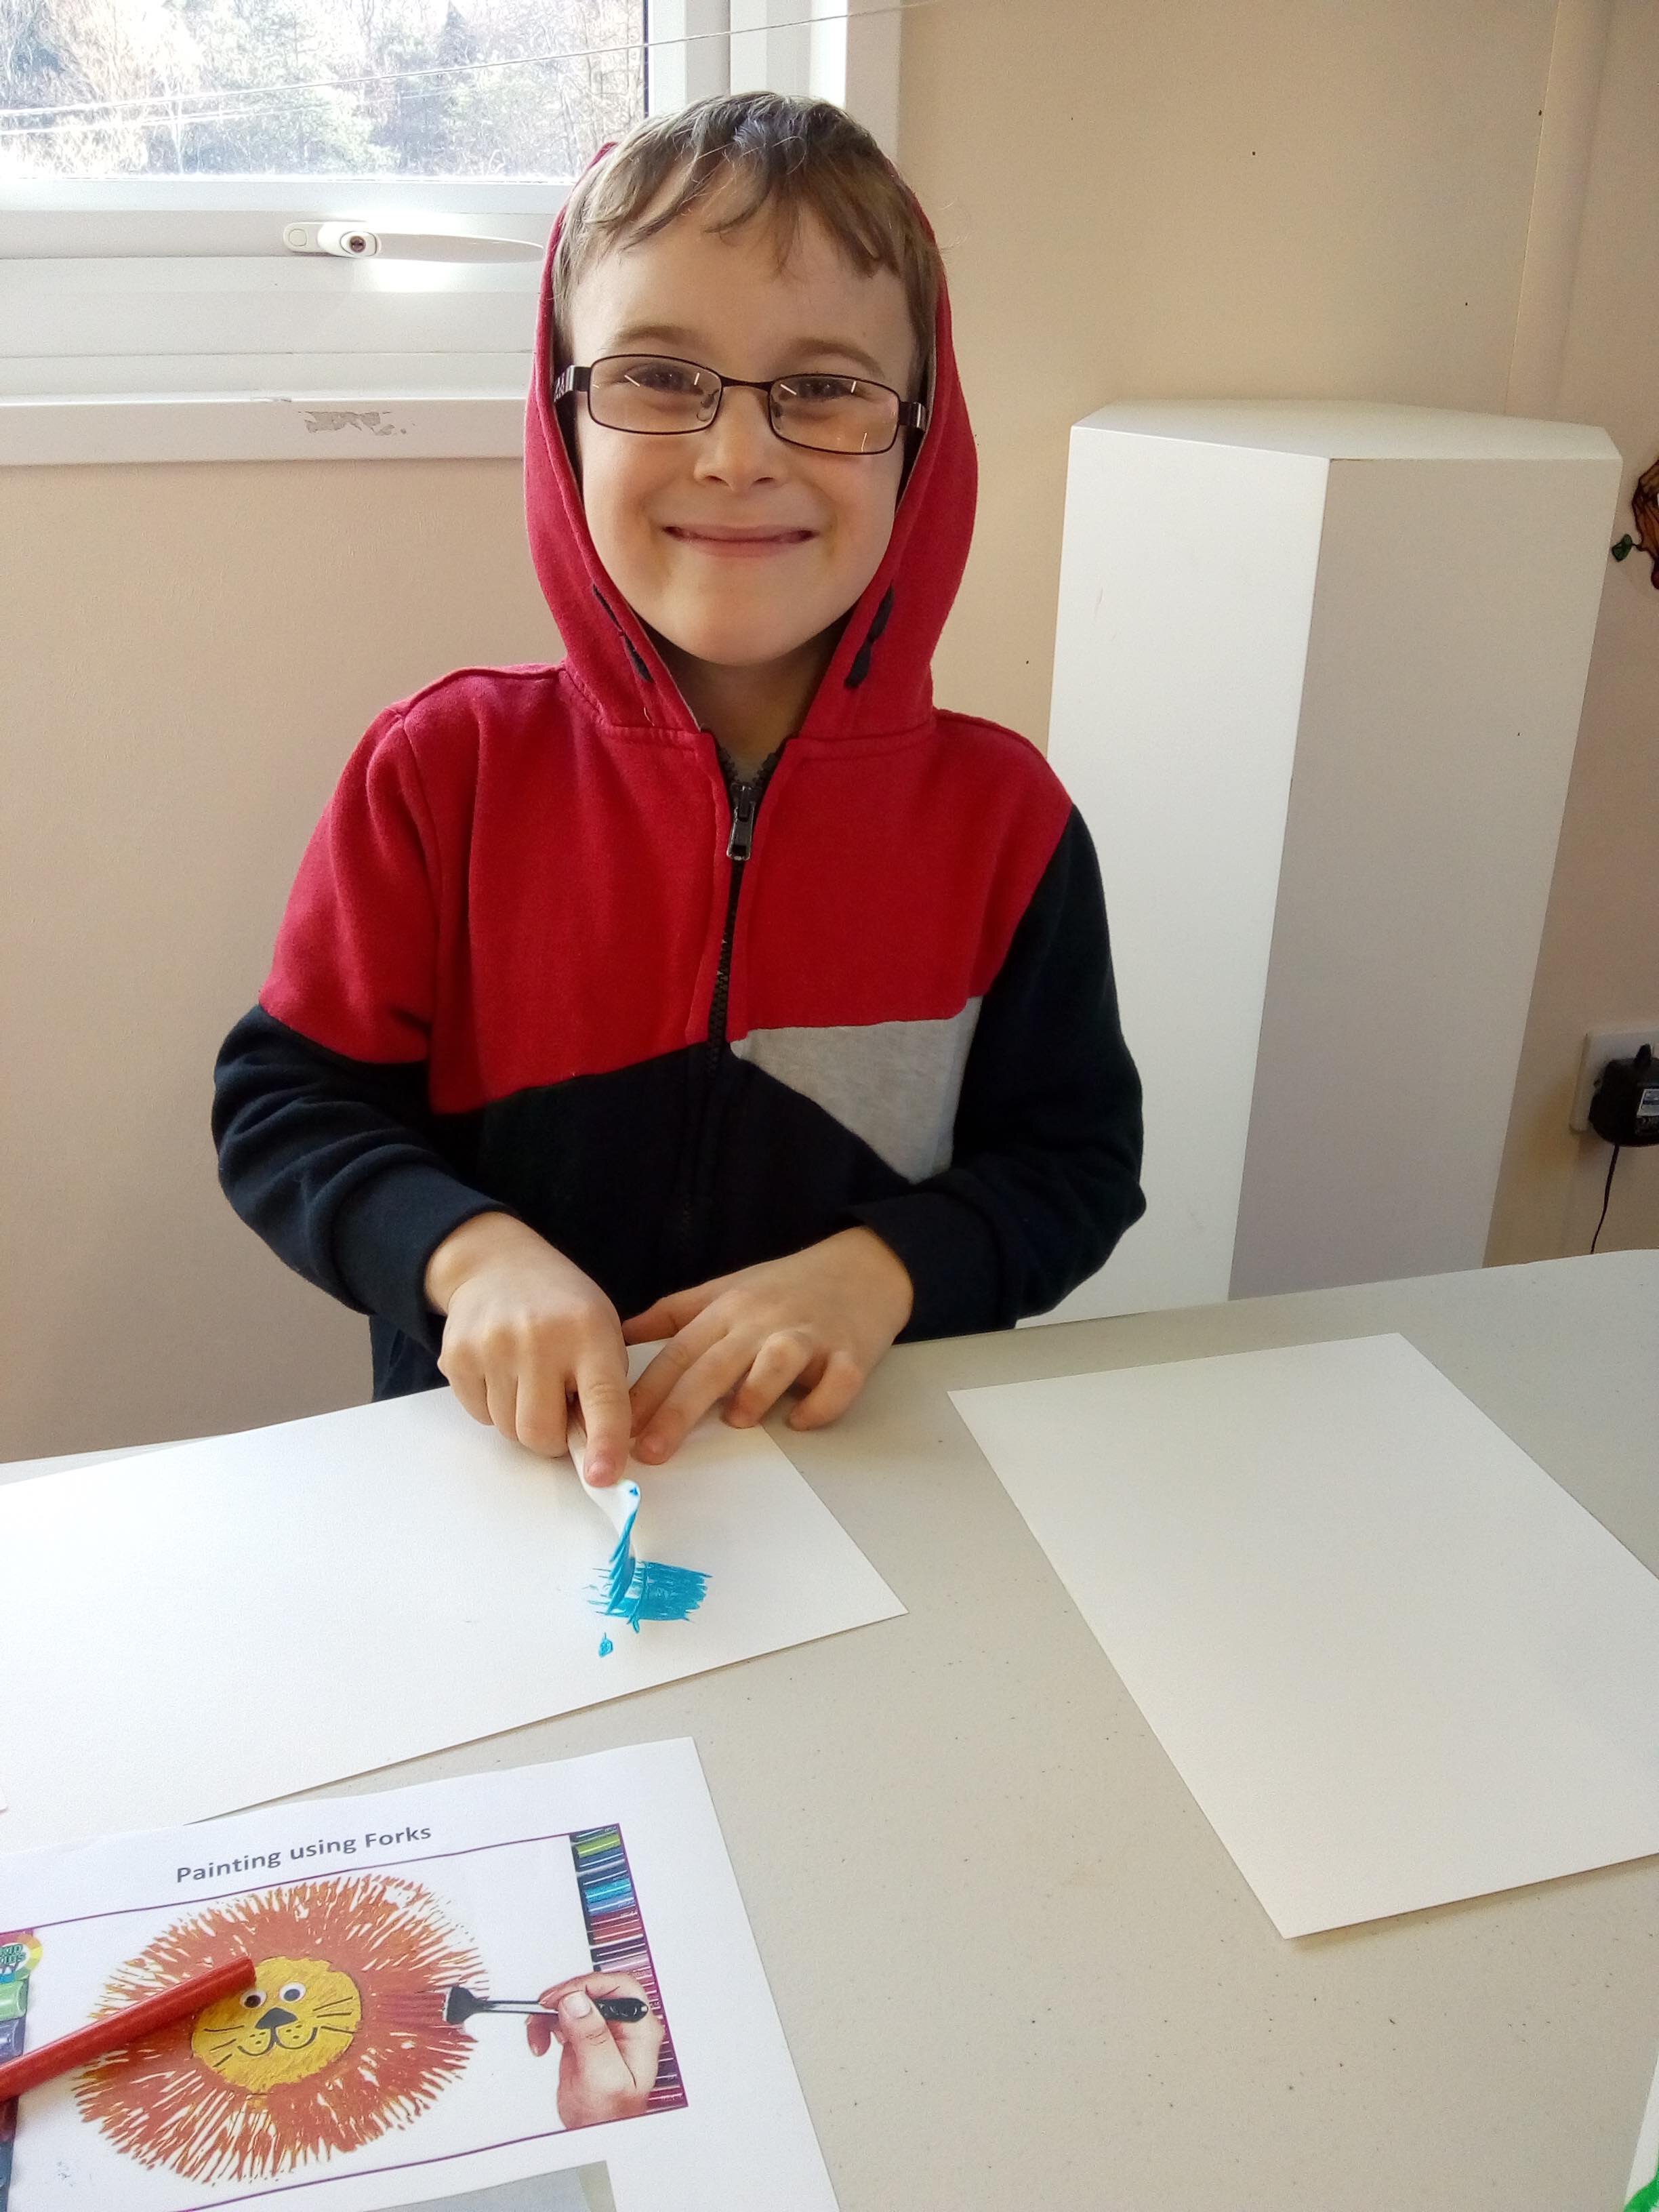 Boy painting and smiling72.jpg